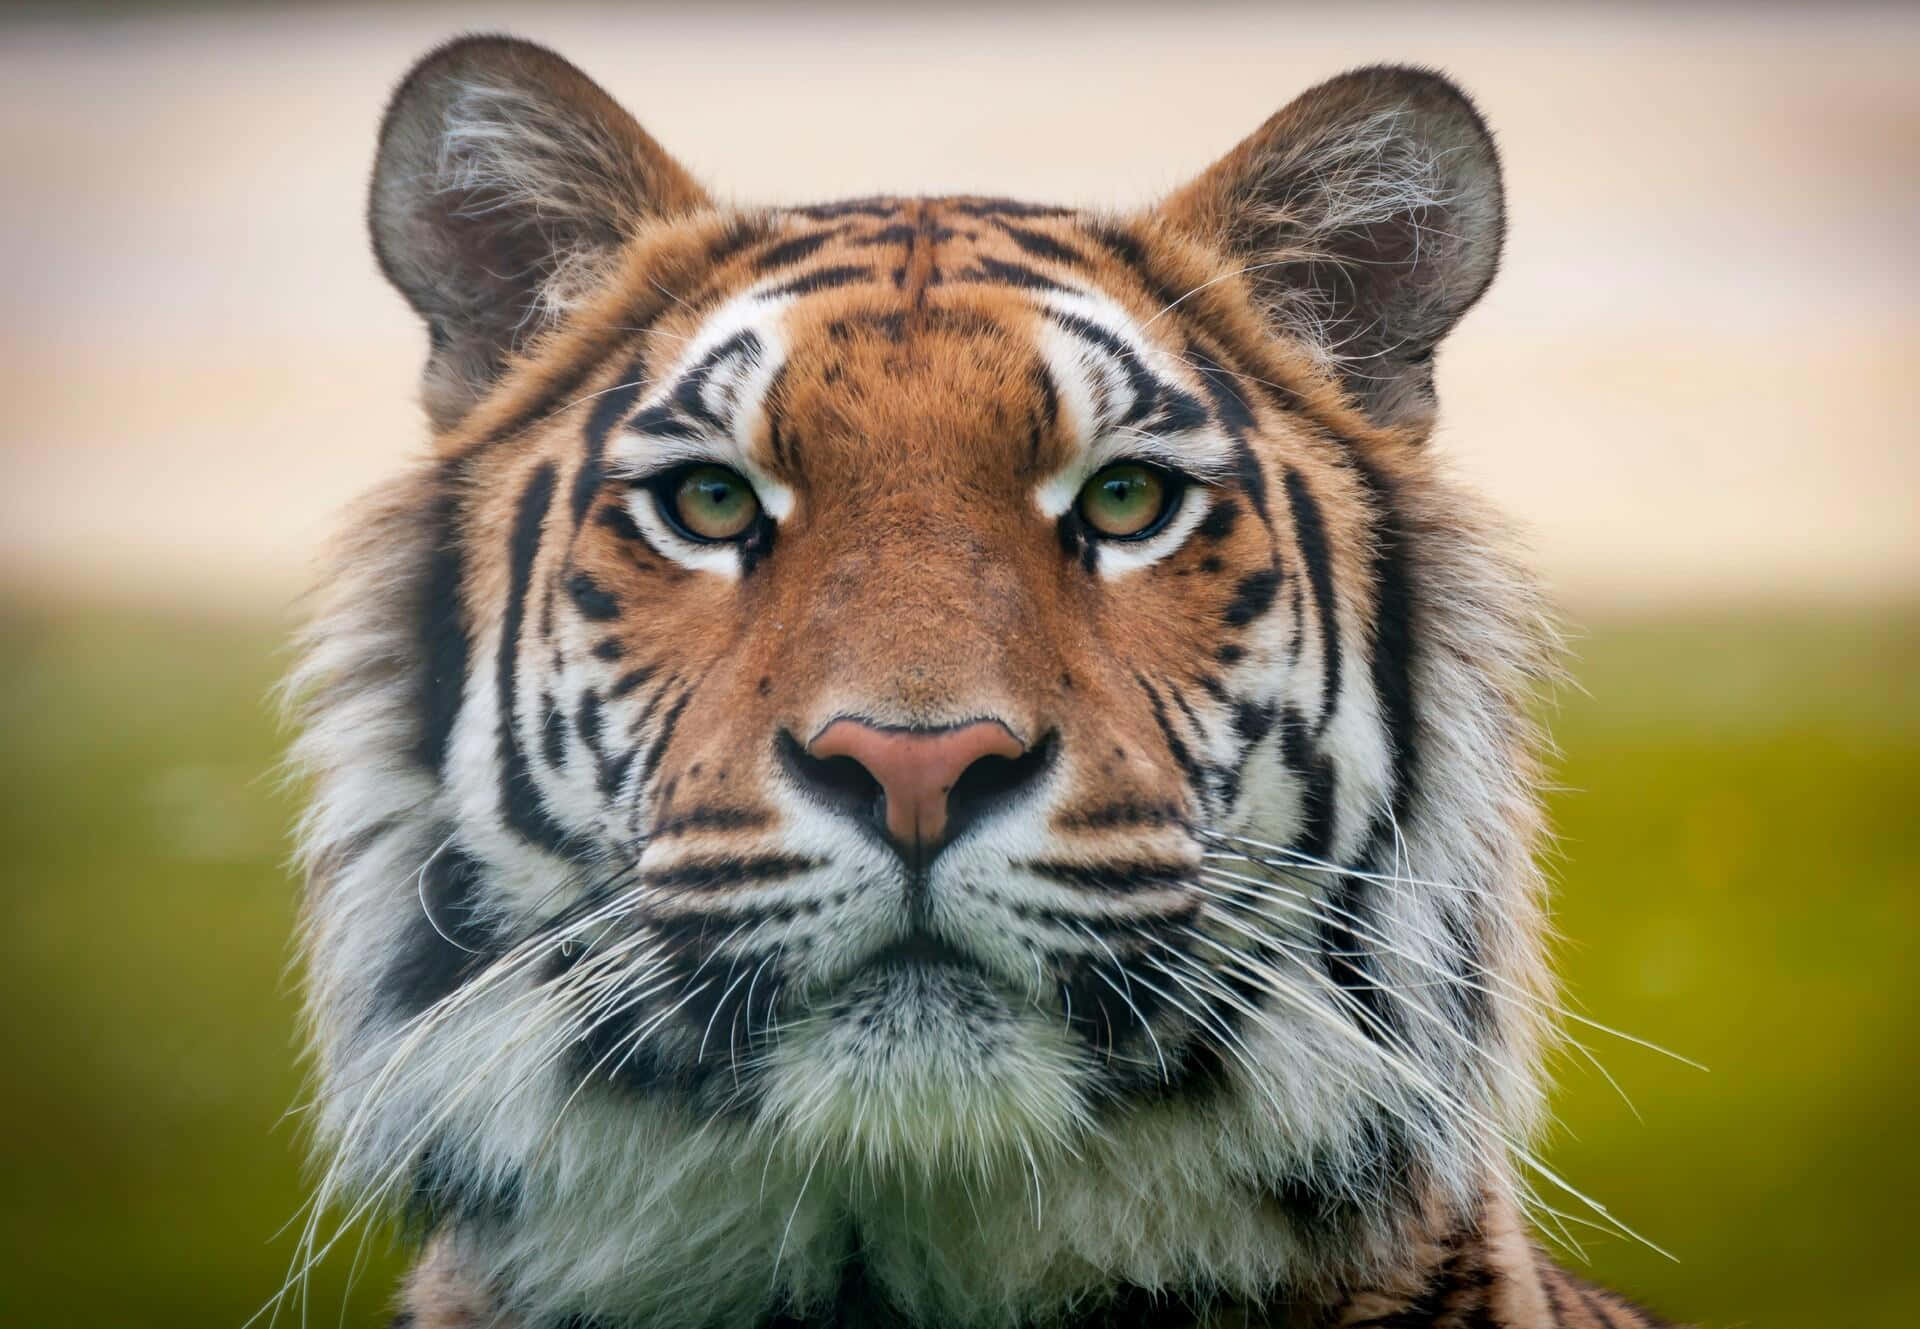 Spectacular Close-up of an Imperial Tiger Roaming Wild